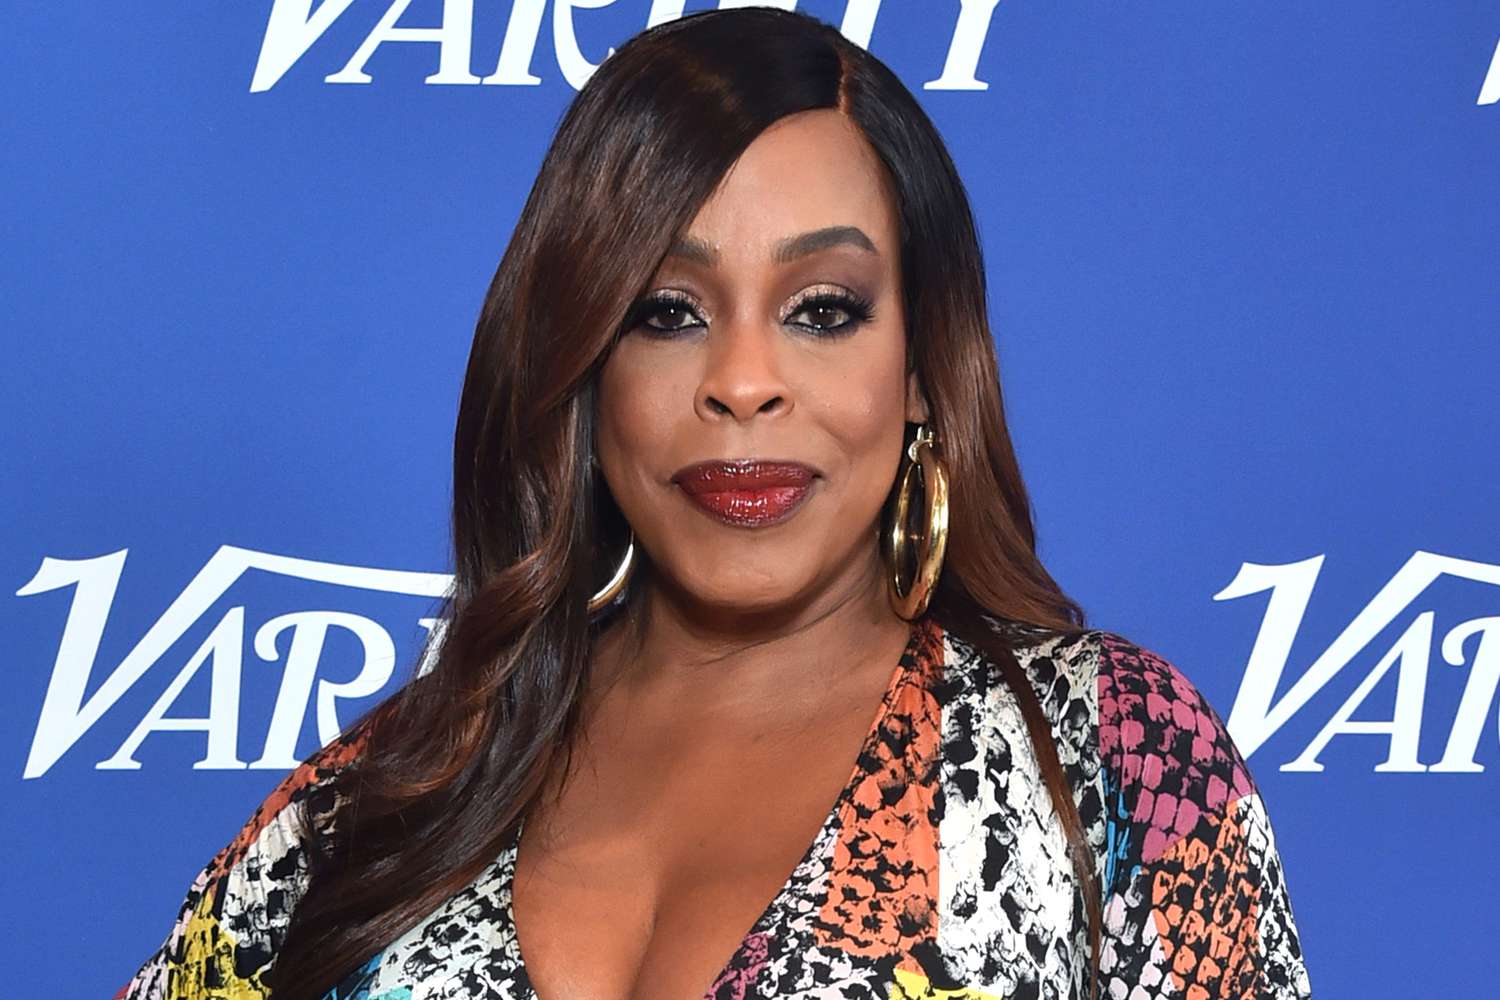 Niecy Nash-Betts hopes Dahmer brought 'solace' to victims' families amid backlash: 'That was what I prayed for'